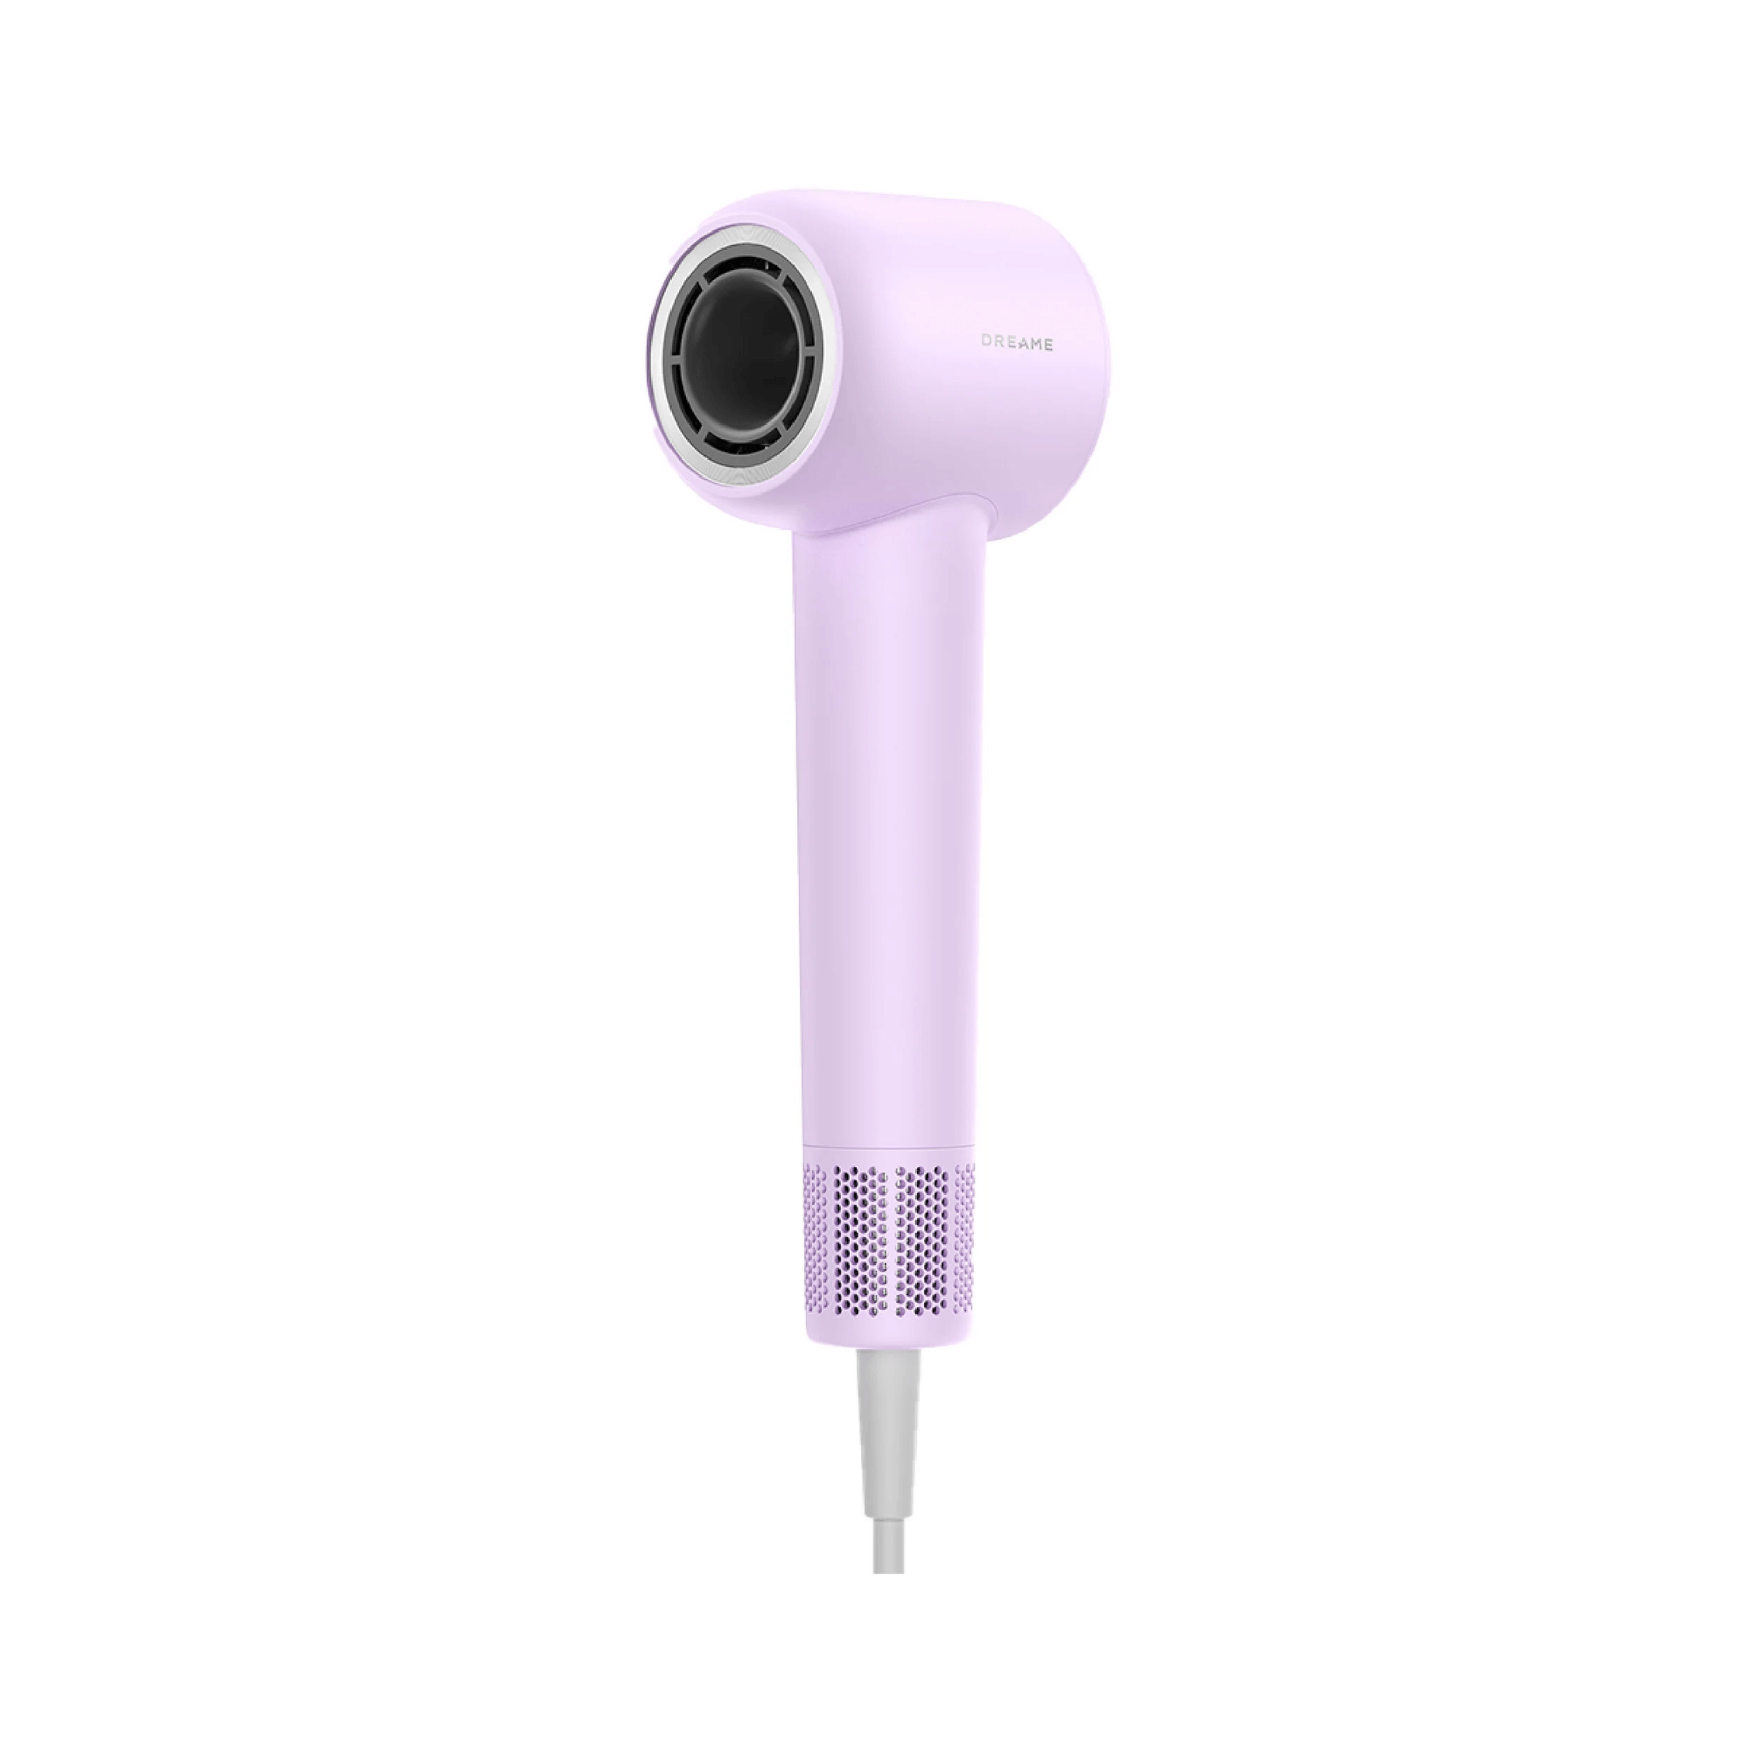 Dreame Gleam High Speed Hair Dryer 40sec Quick Drying 200 Million Ion 65m/s Airspeed